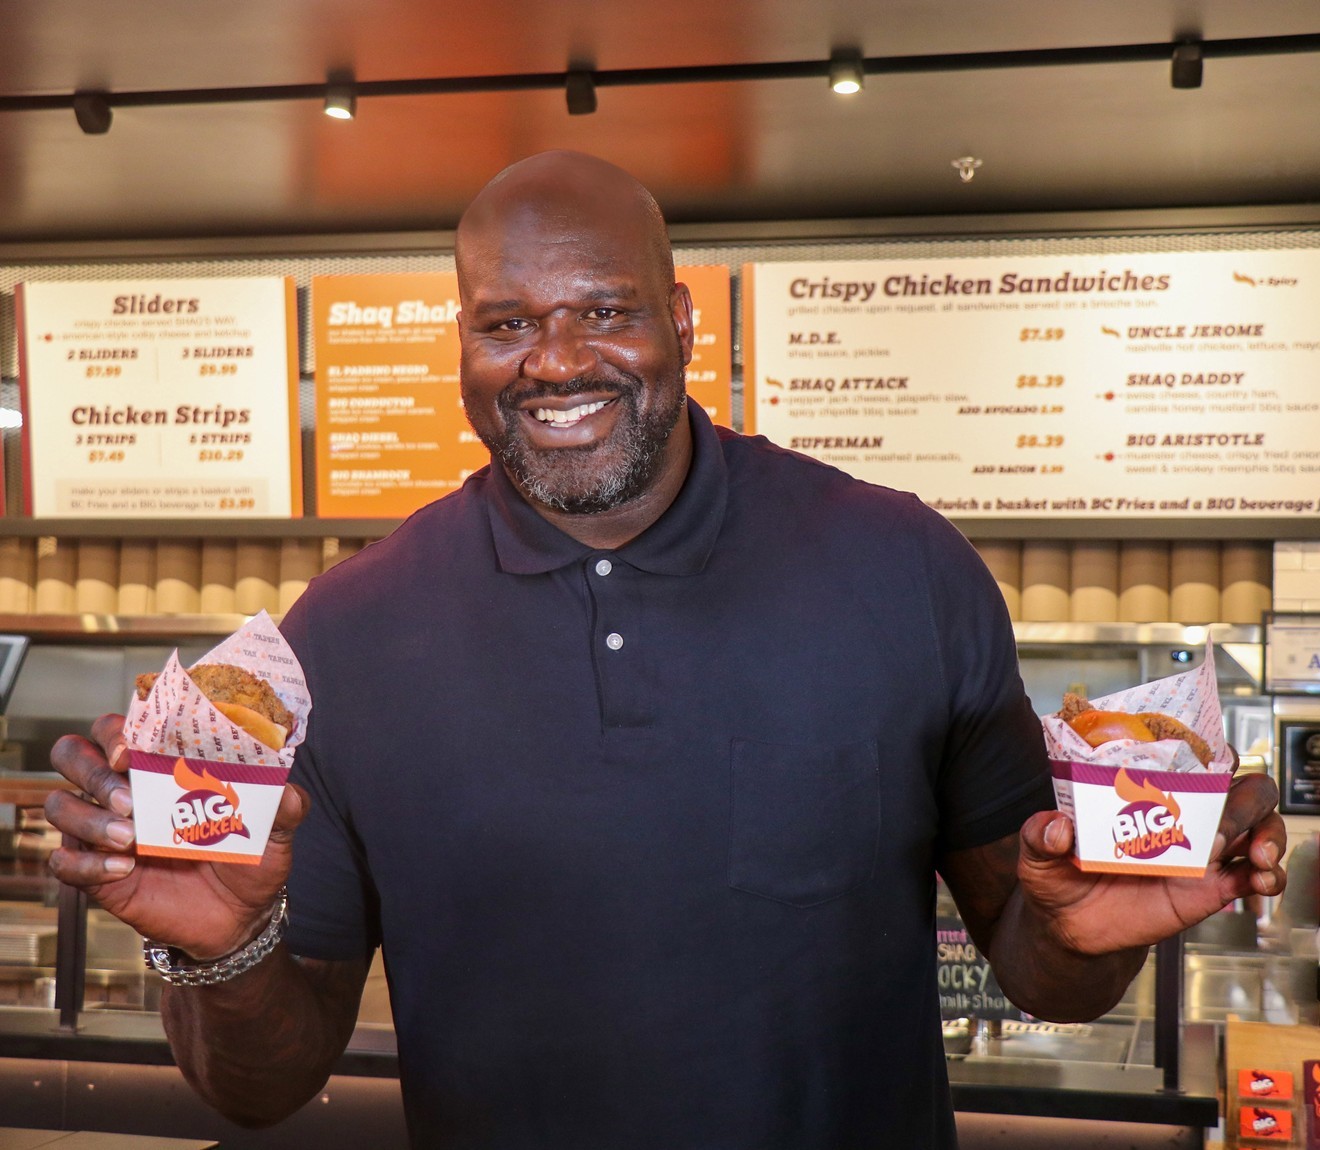 Shaq is back with more Houston restaurants.